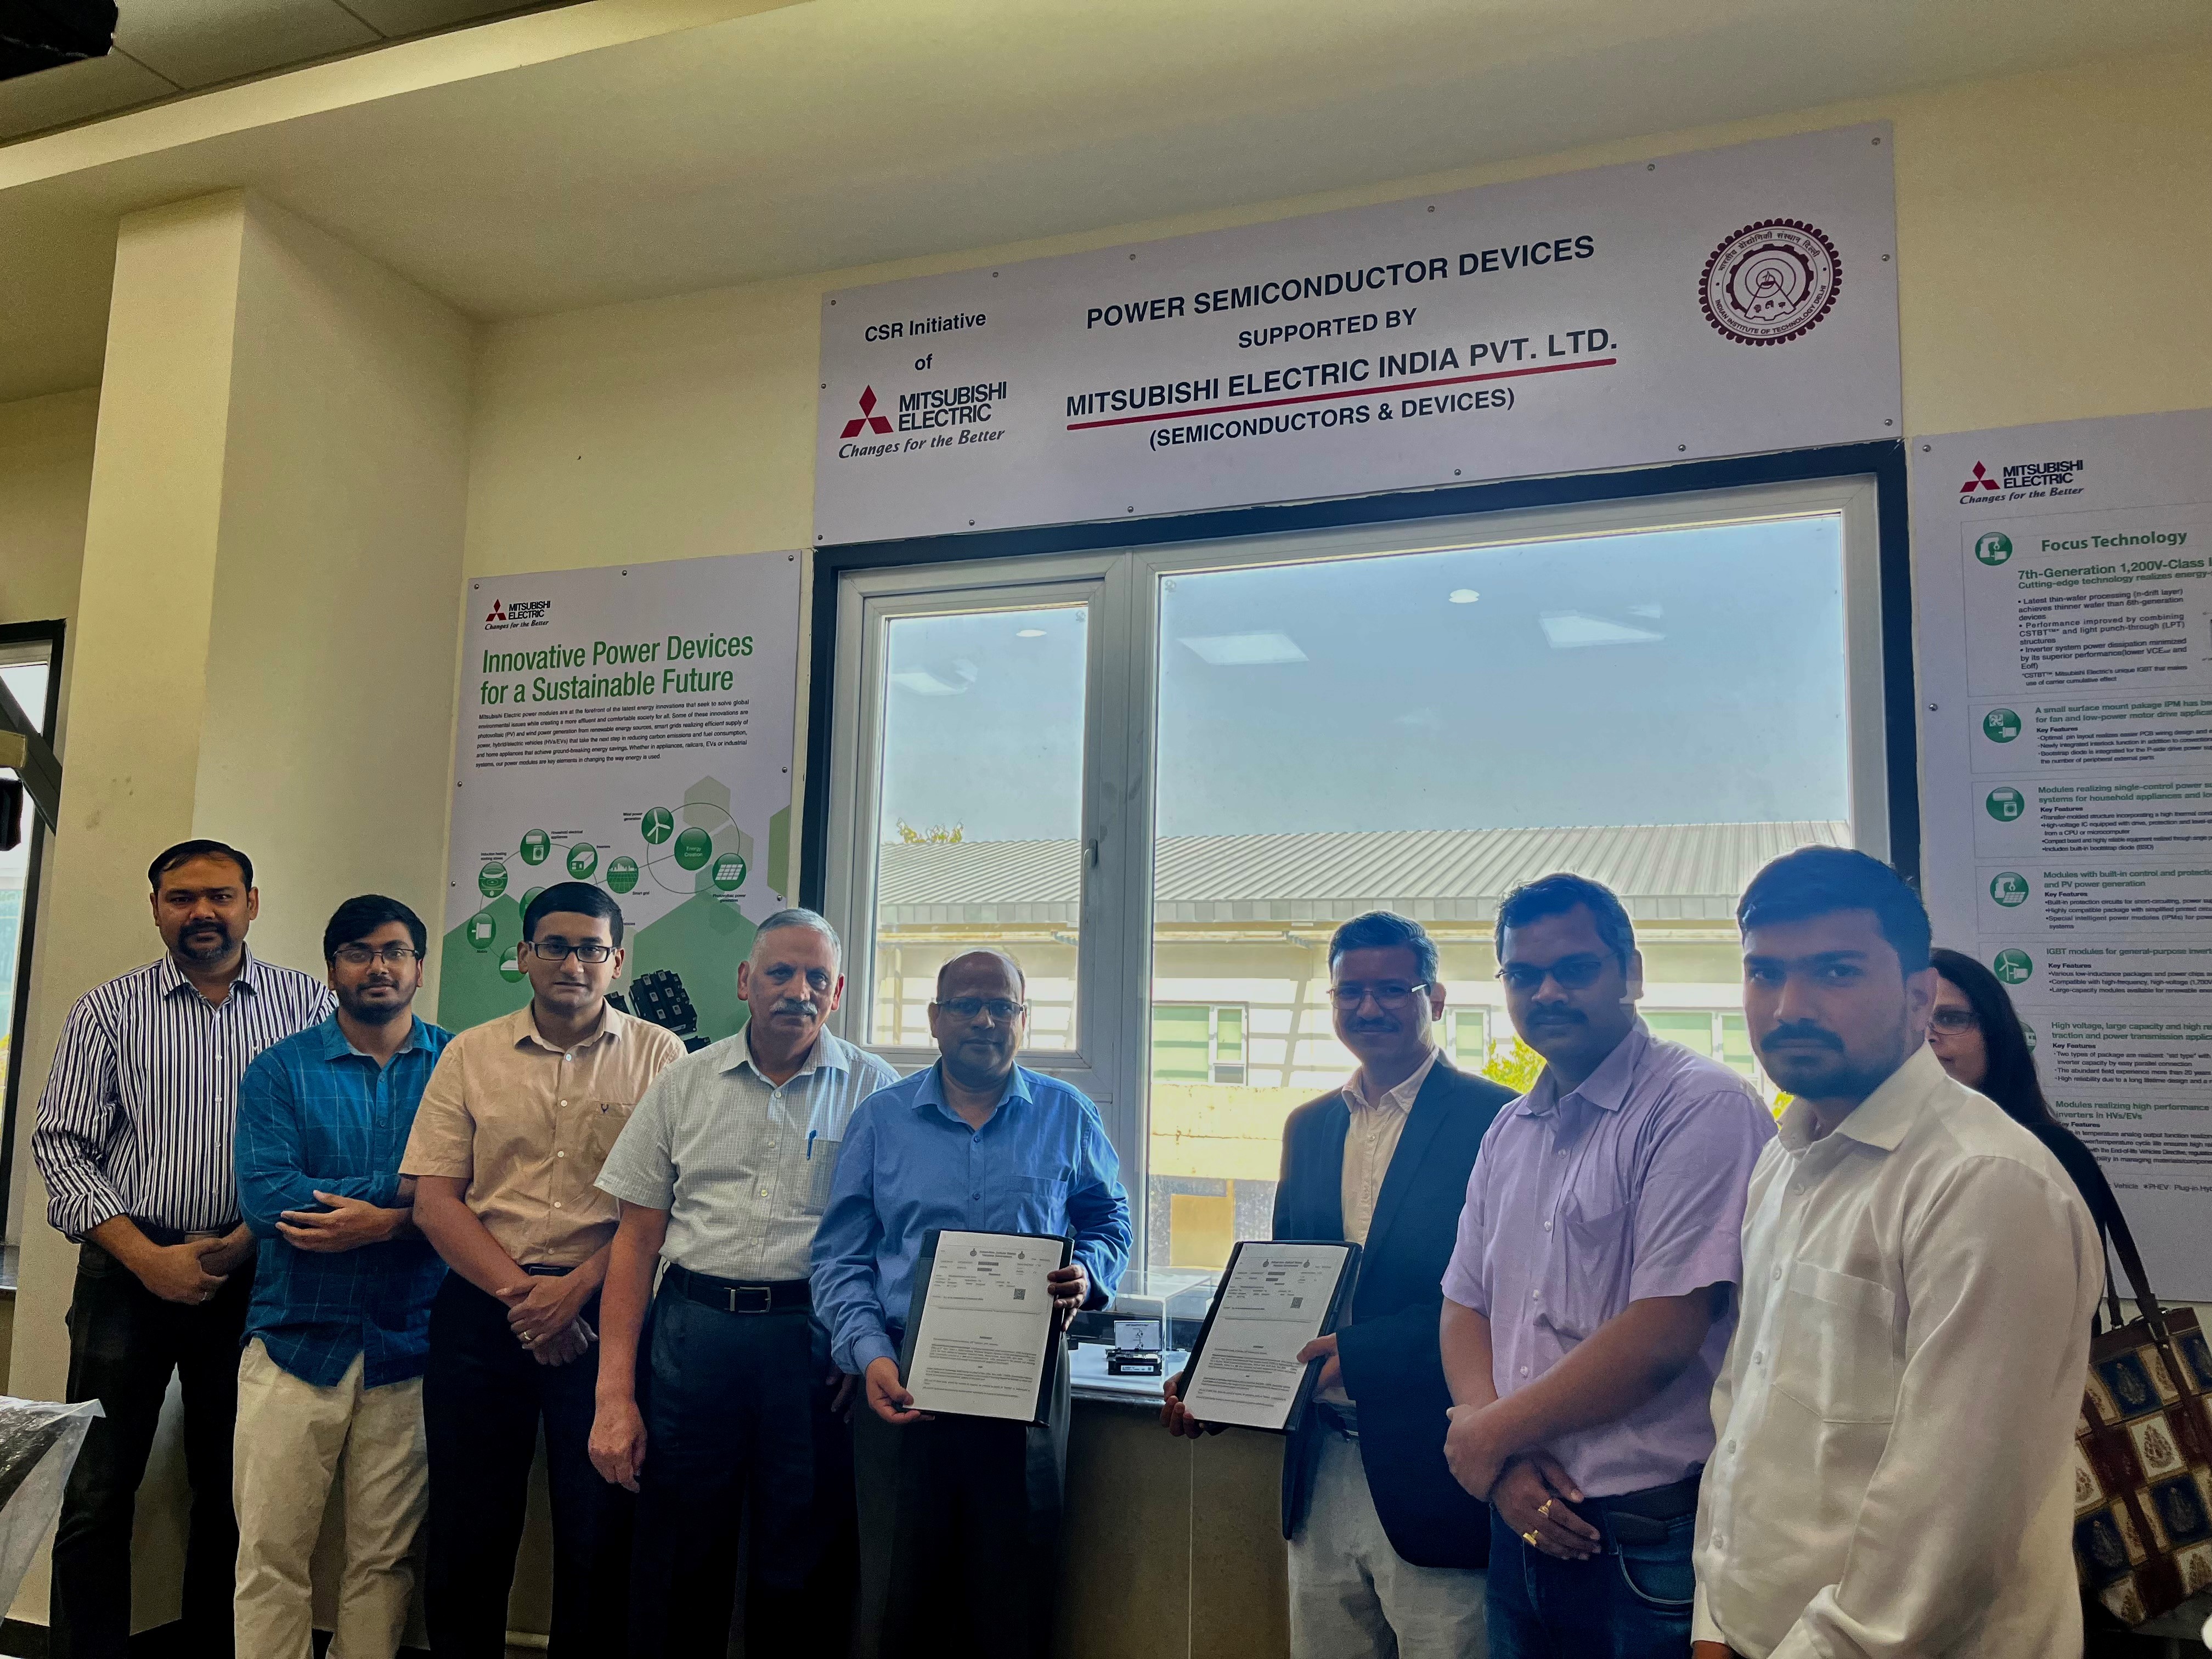 Mitsubishi Electric Boosts its Semiconductor and Devices Lab Program across India